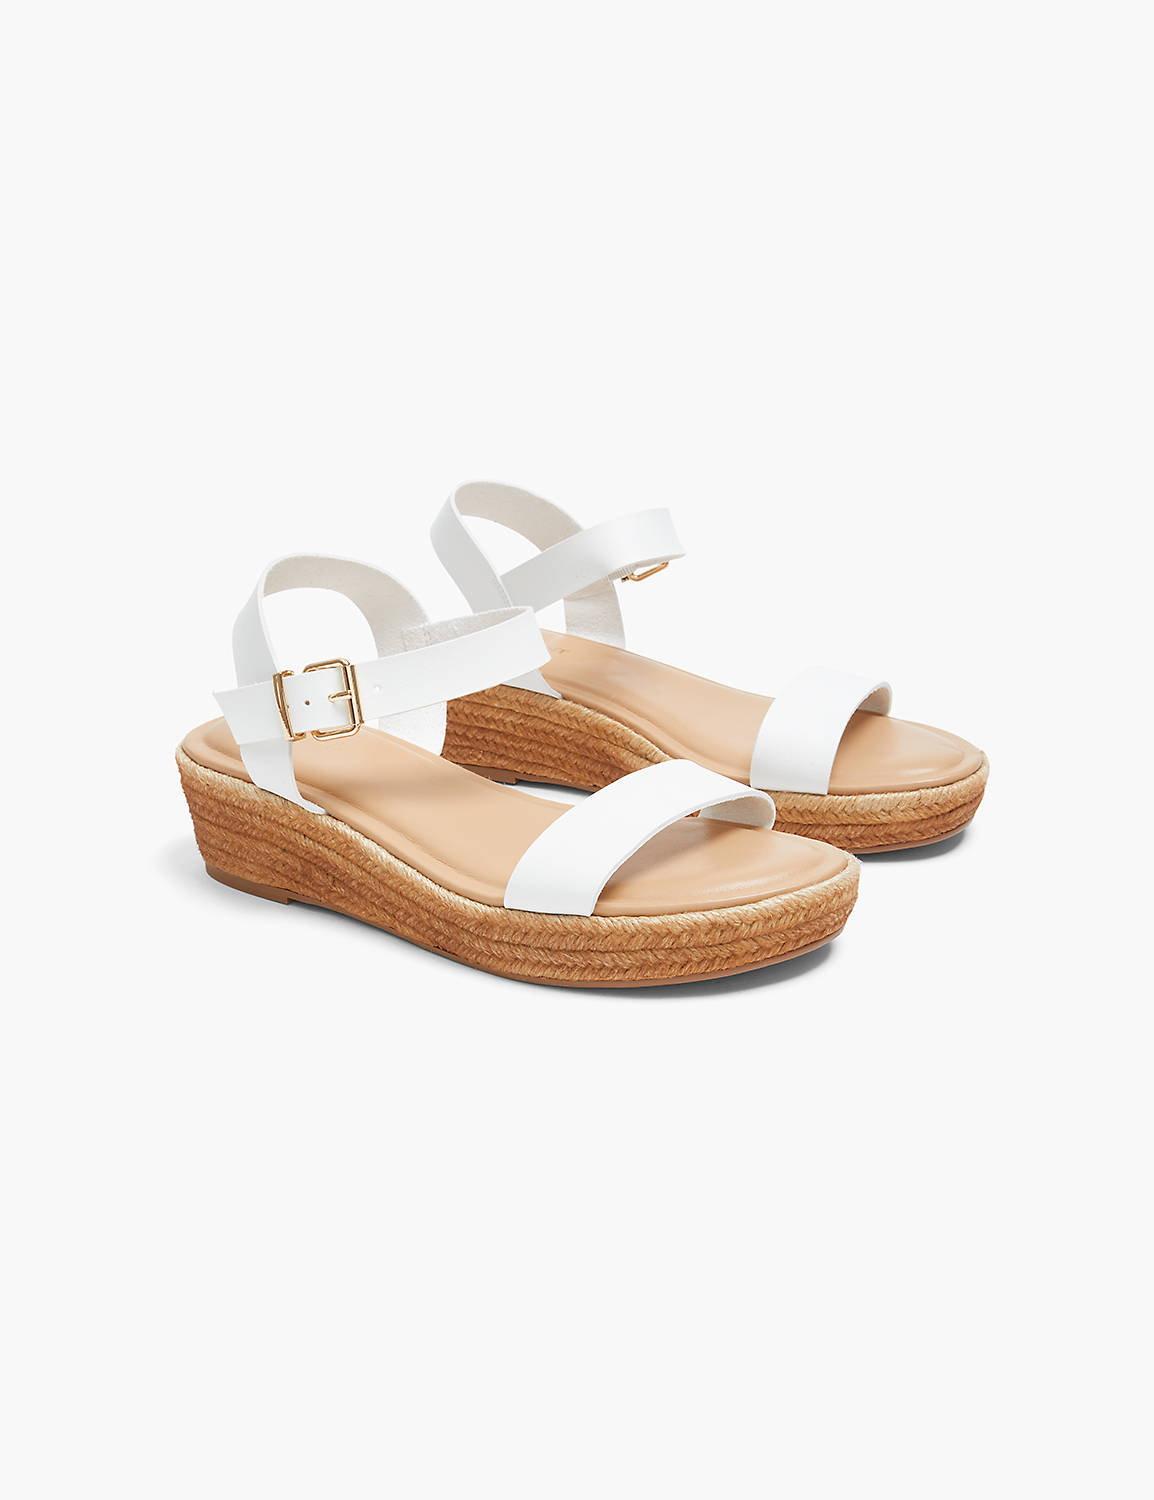 SINGLE STRAP OMBRE WEDGE ESPADRILLE Product Image 1